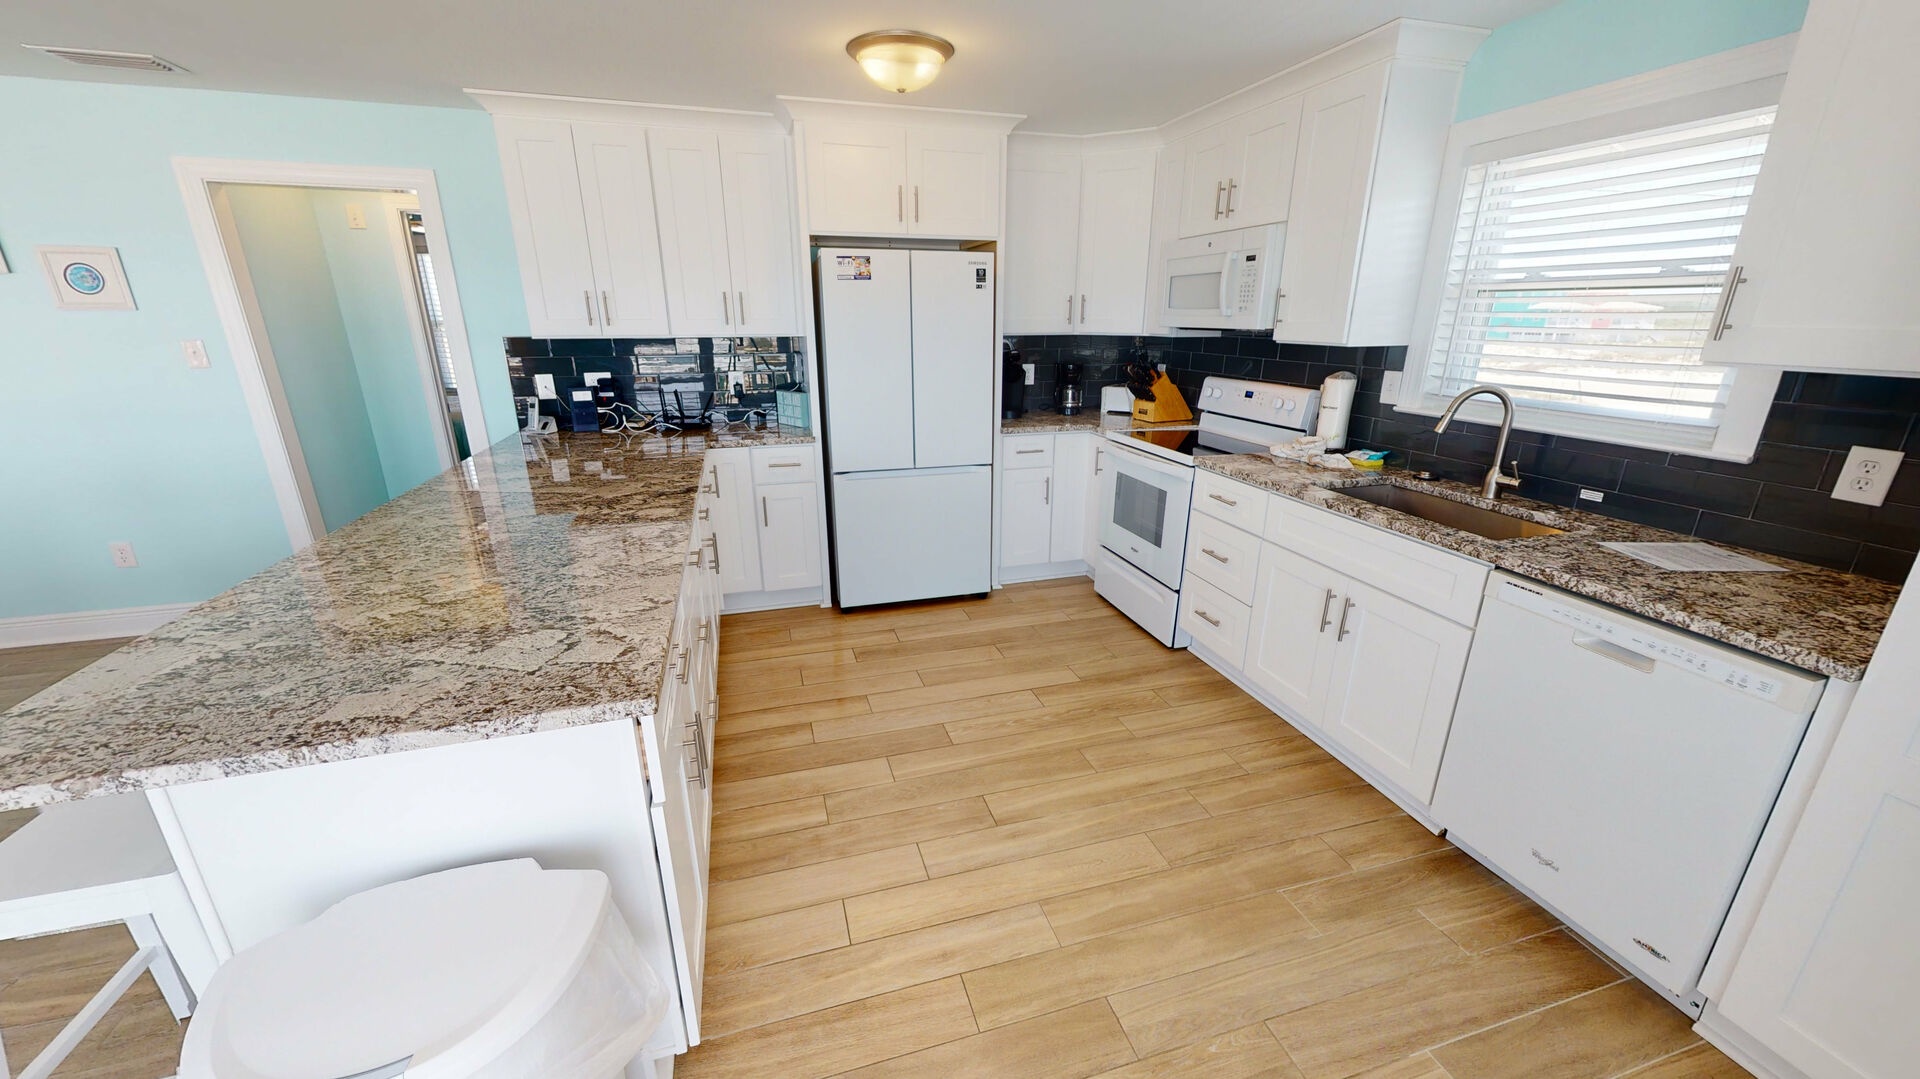 Spacious kitchen with granite countertops, significant counter space, and bar seating for 4